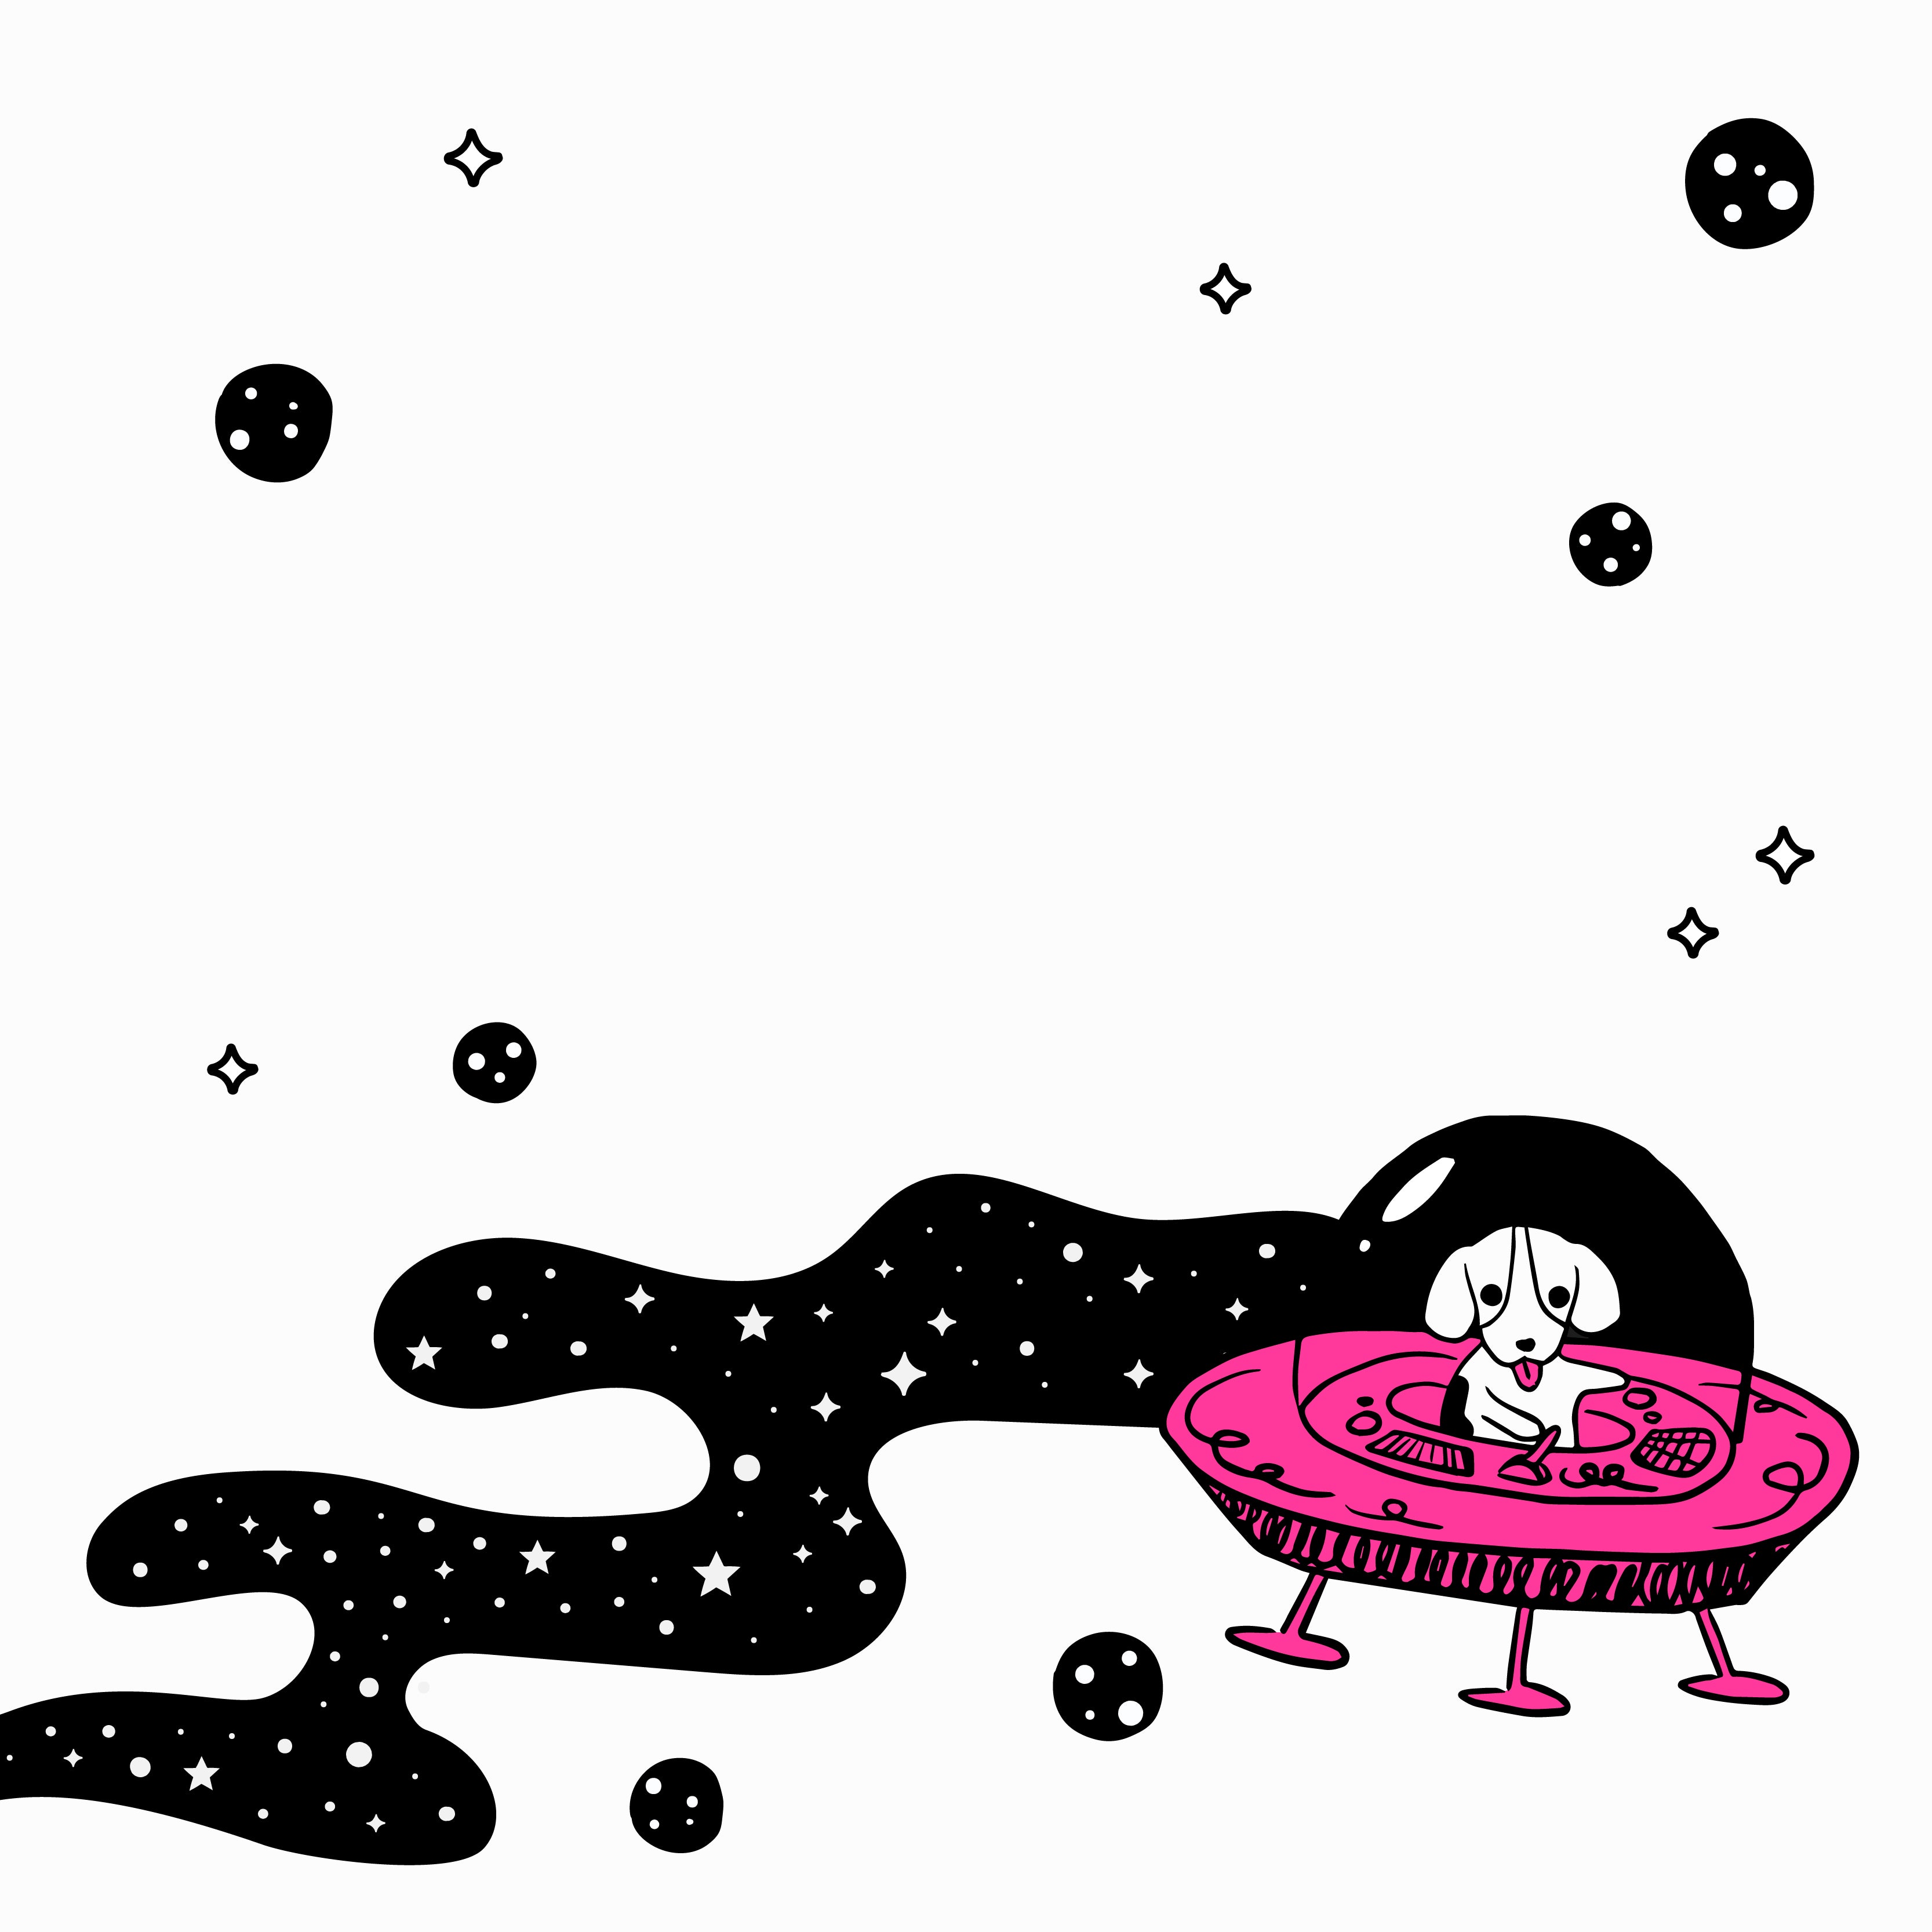 Background design of black swirling clouds and a dog in a UFO 